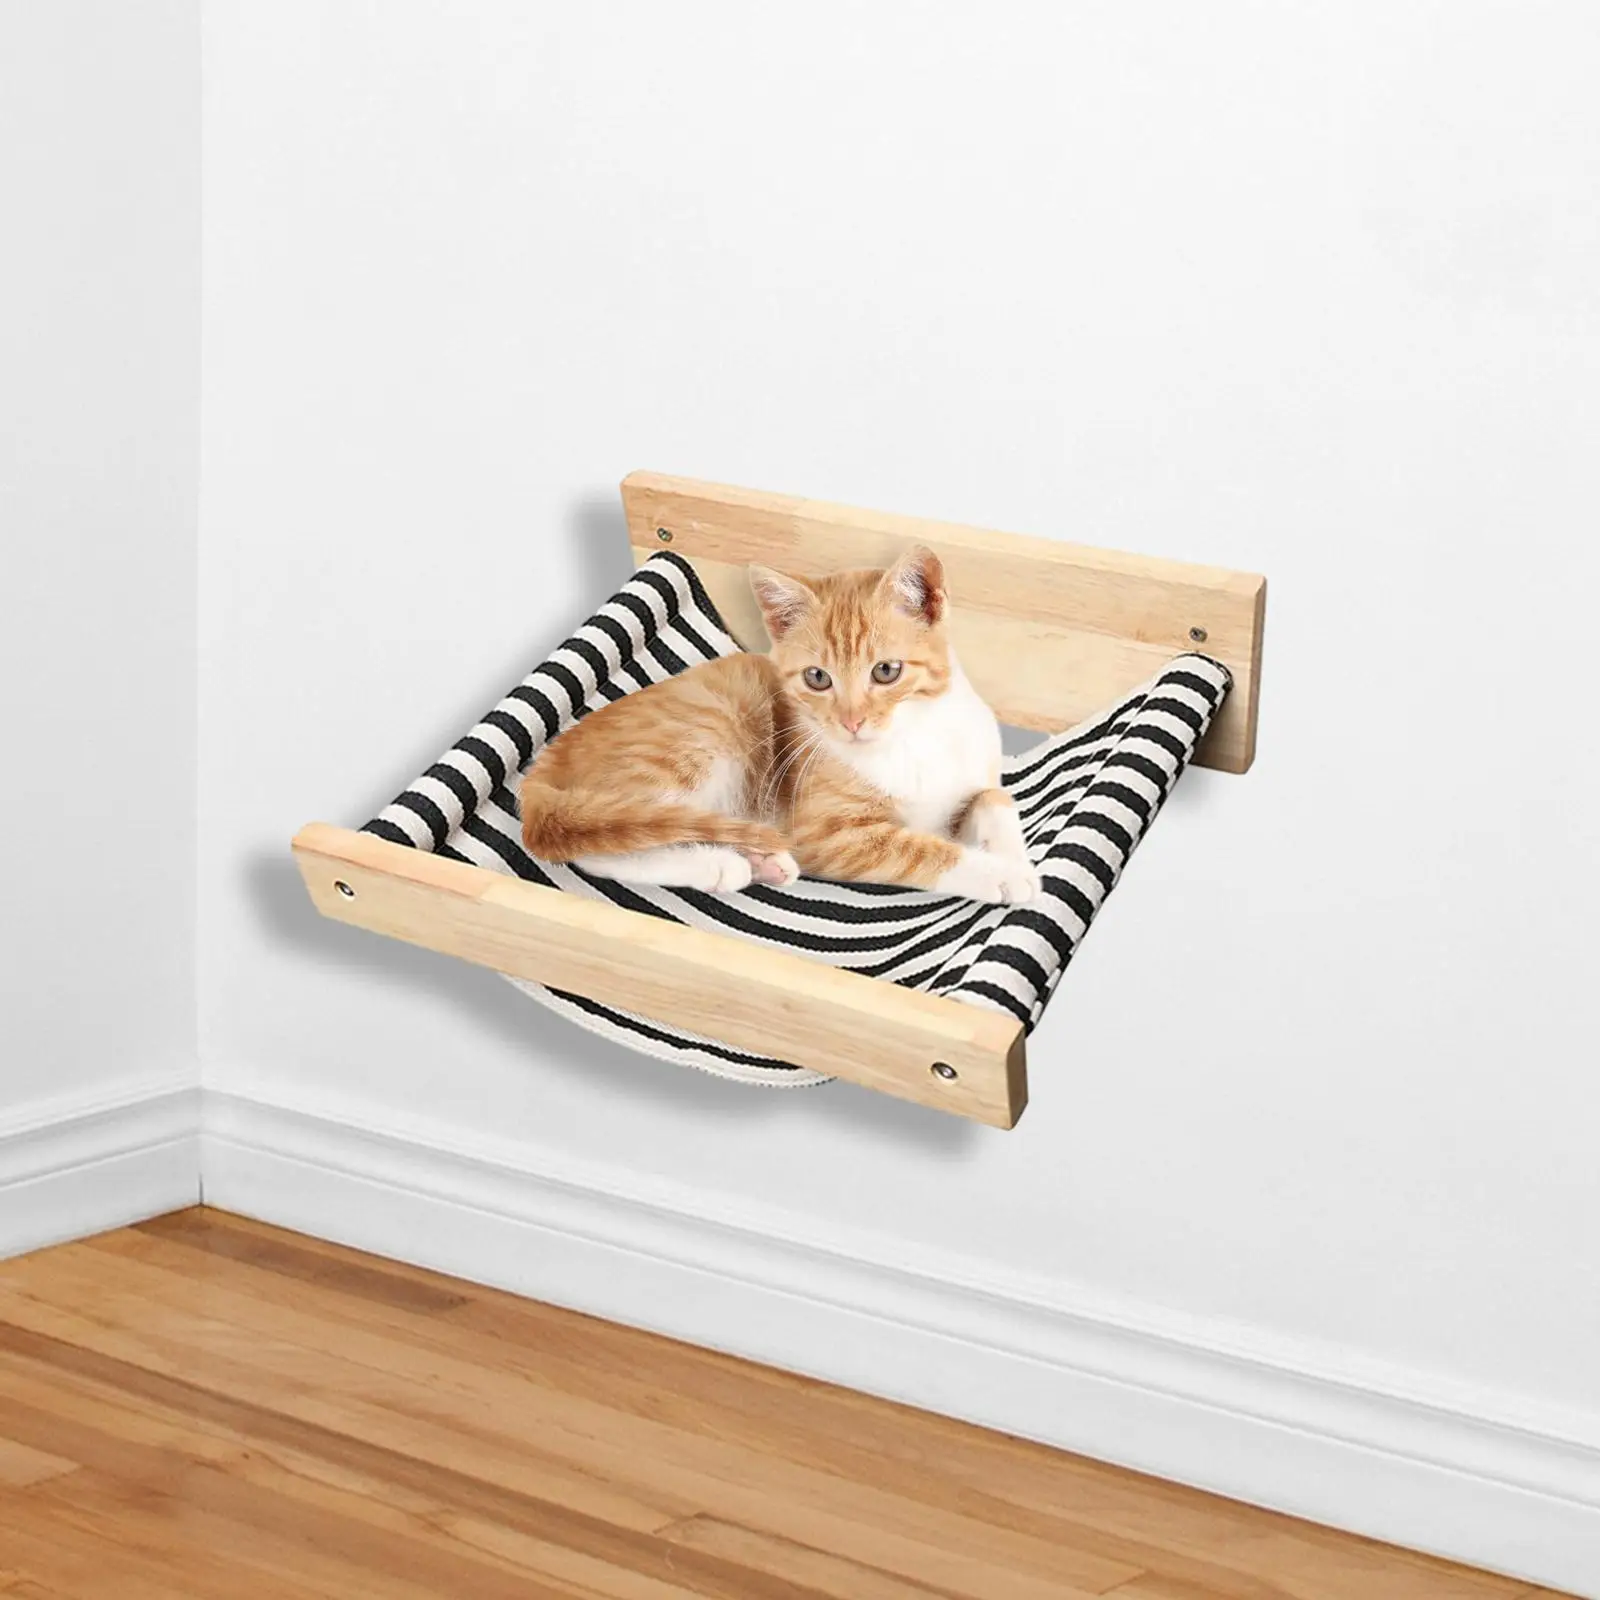 Cat Hammock Wall Mounted Sleeping Solid Comfortable Playing Lounging Pet Cat Bed Black Stripe Cat Shelves Kitty Beds Perches